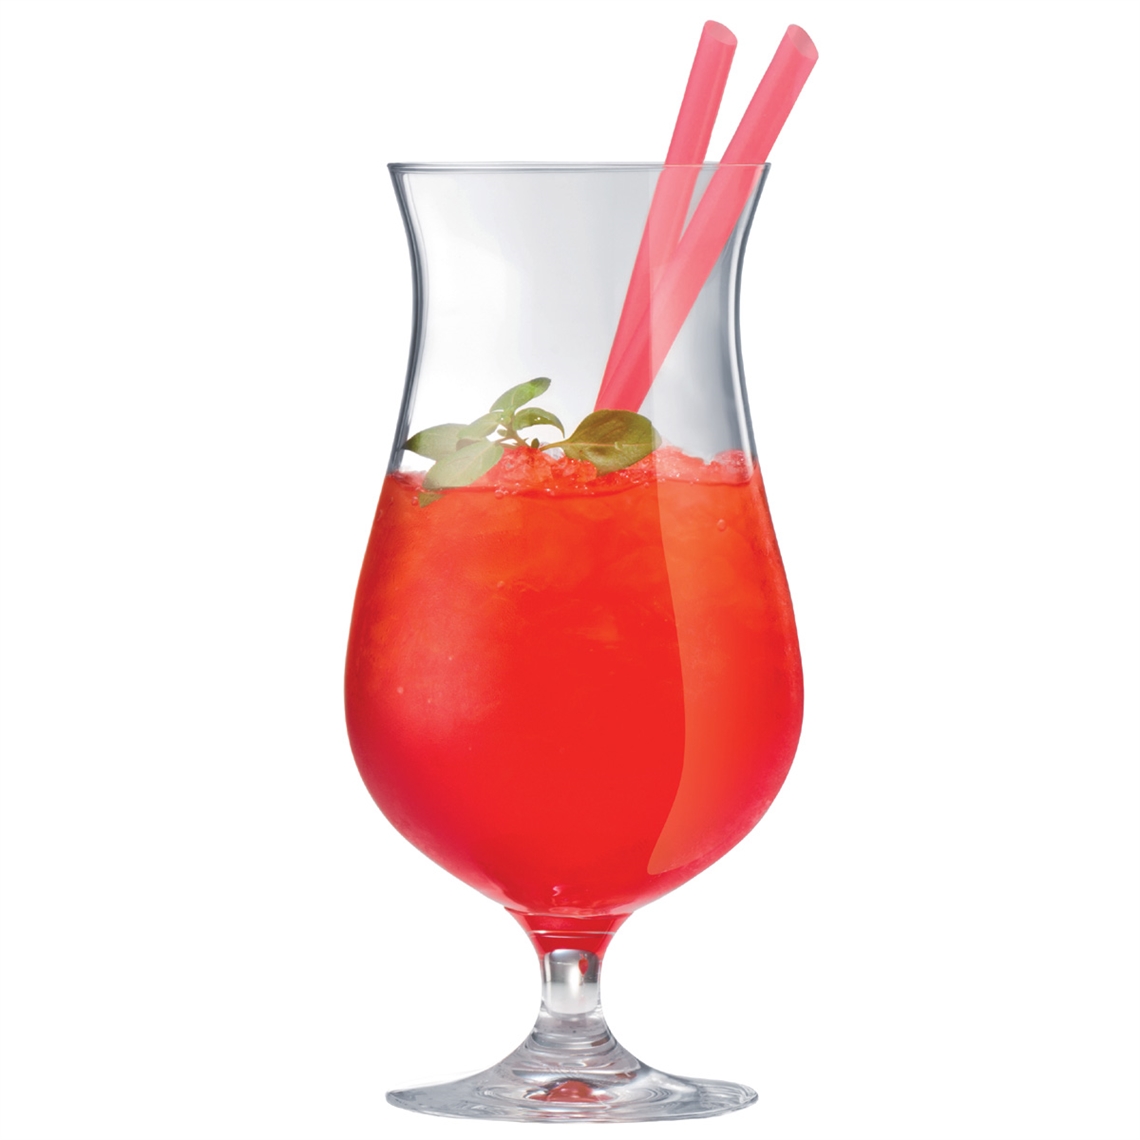 View more restaurant glasses - riedel from our Cocktail Glasses range